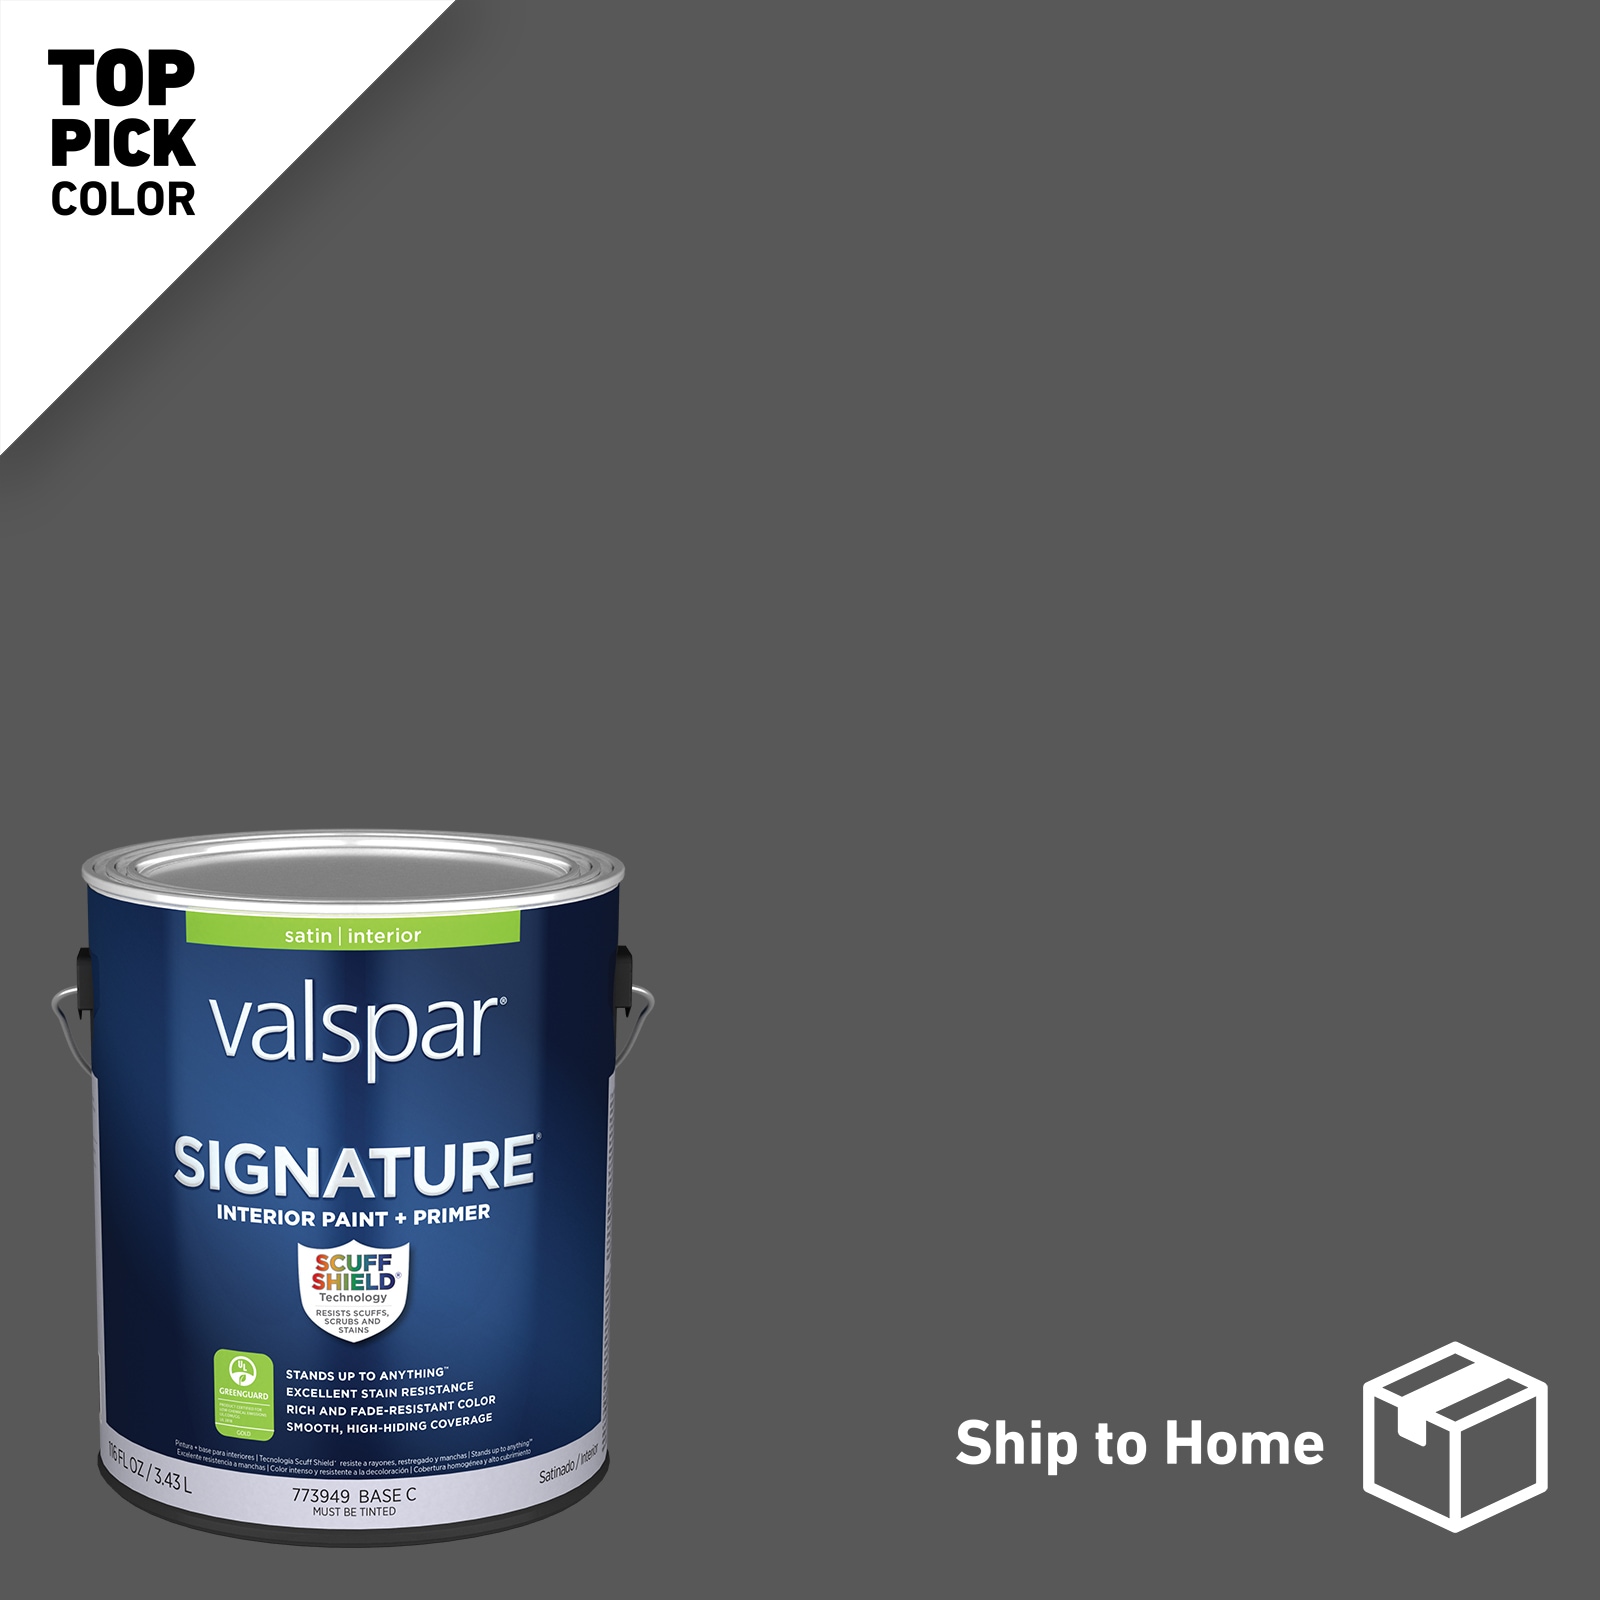 Valspar 4003-2A Cathedral Stone Precisely Matched For Paint and Spray Paint